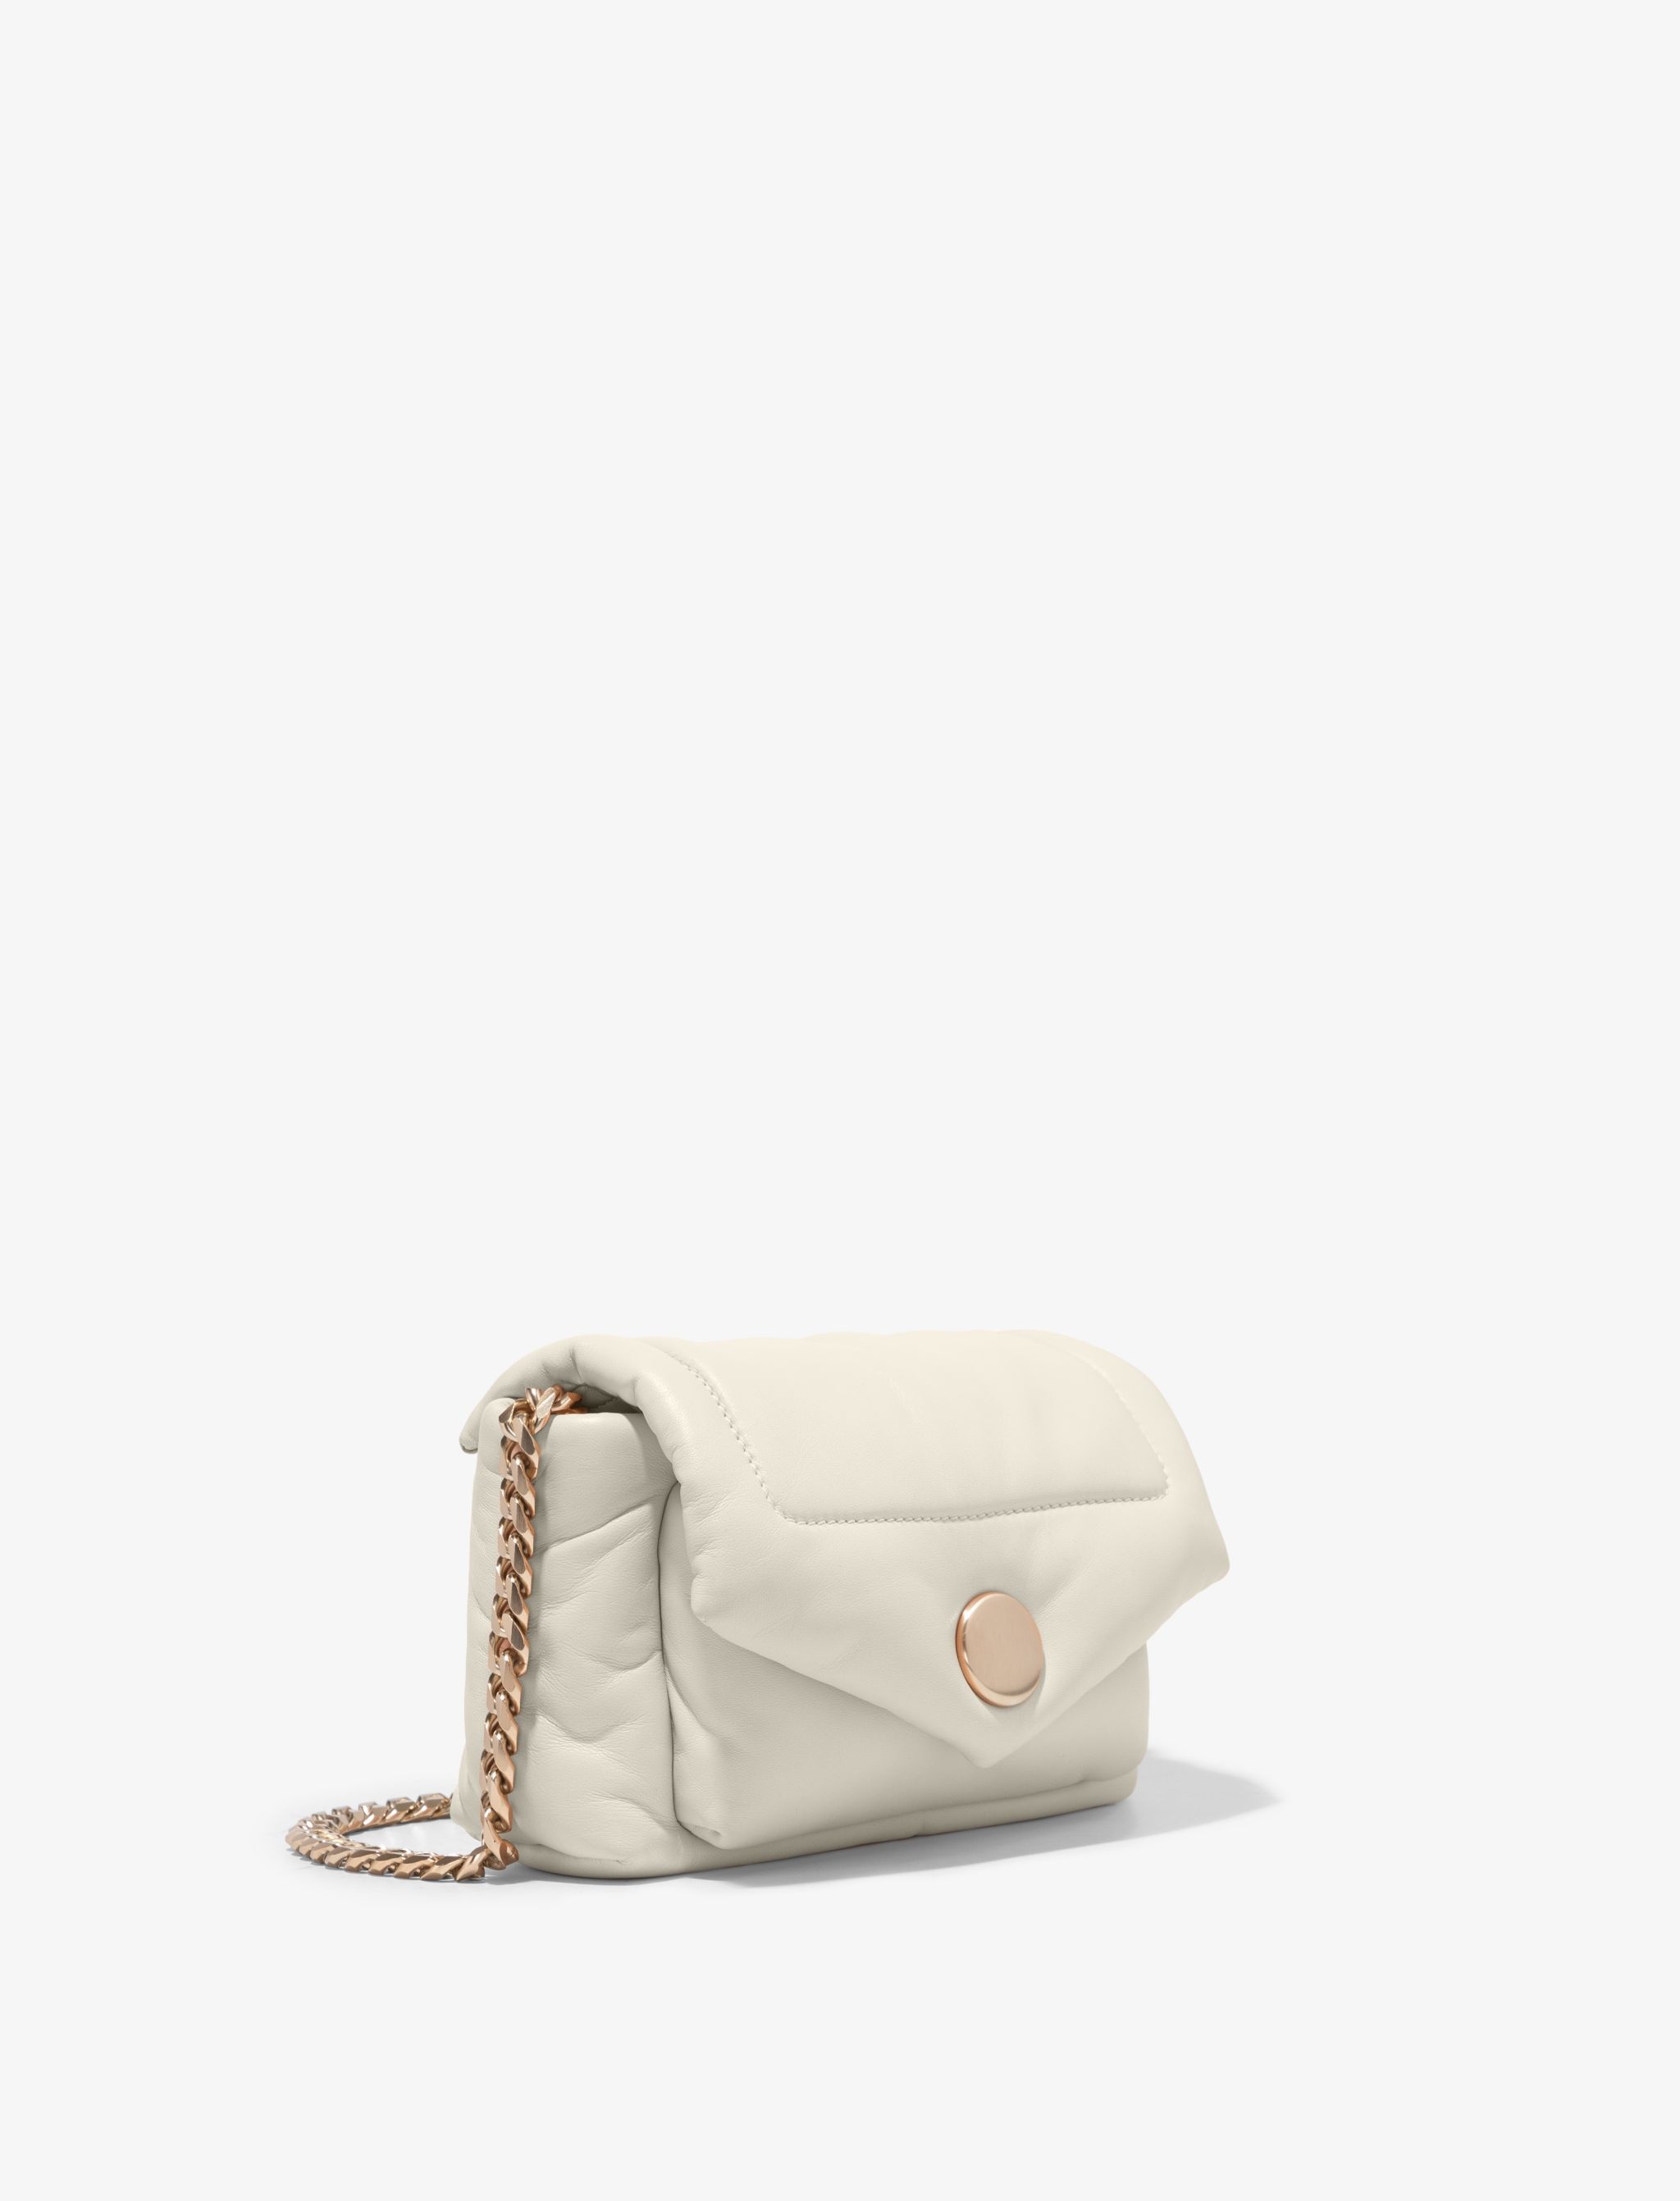 Proenza Schouler Small PS Harris Leather Bag